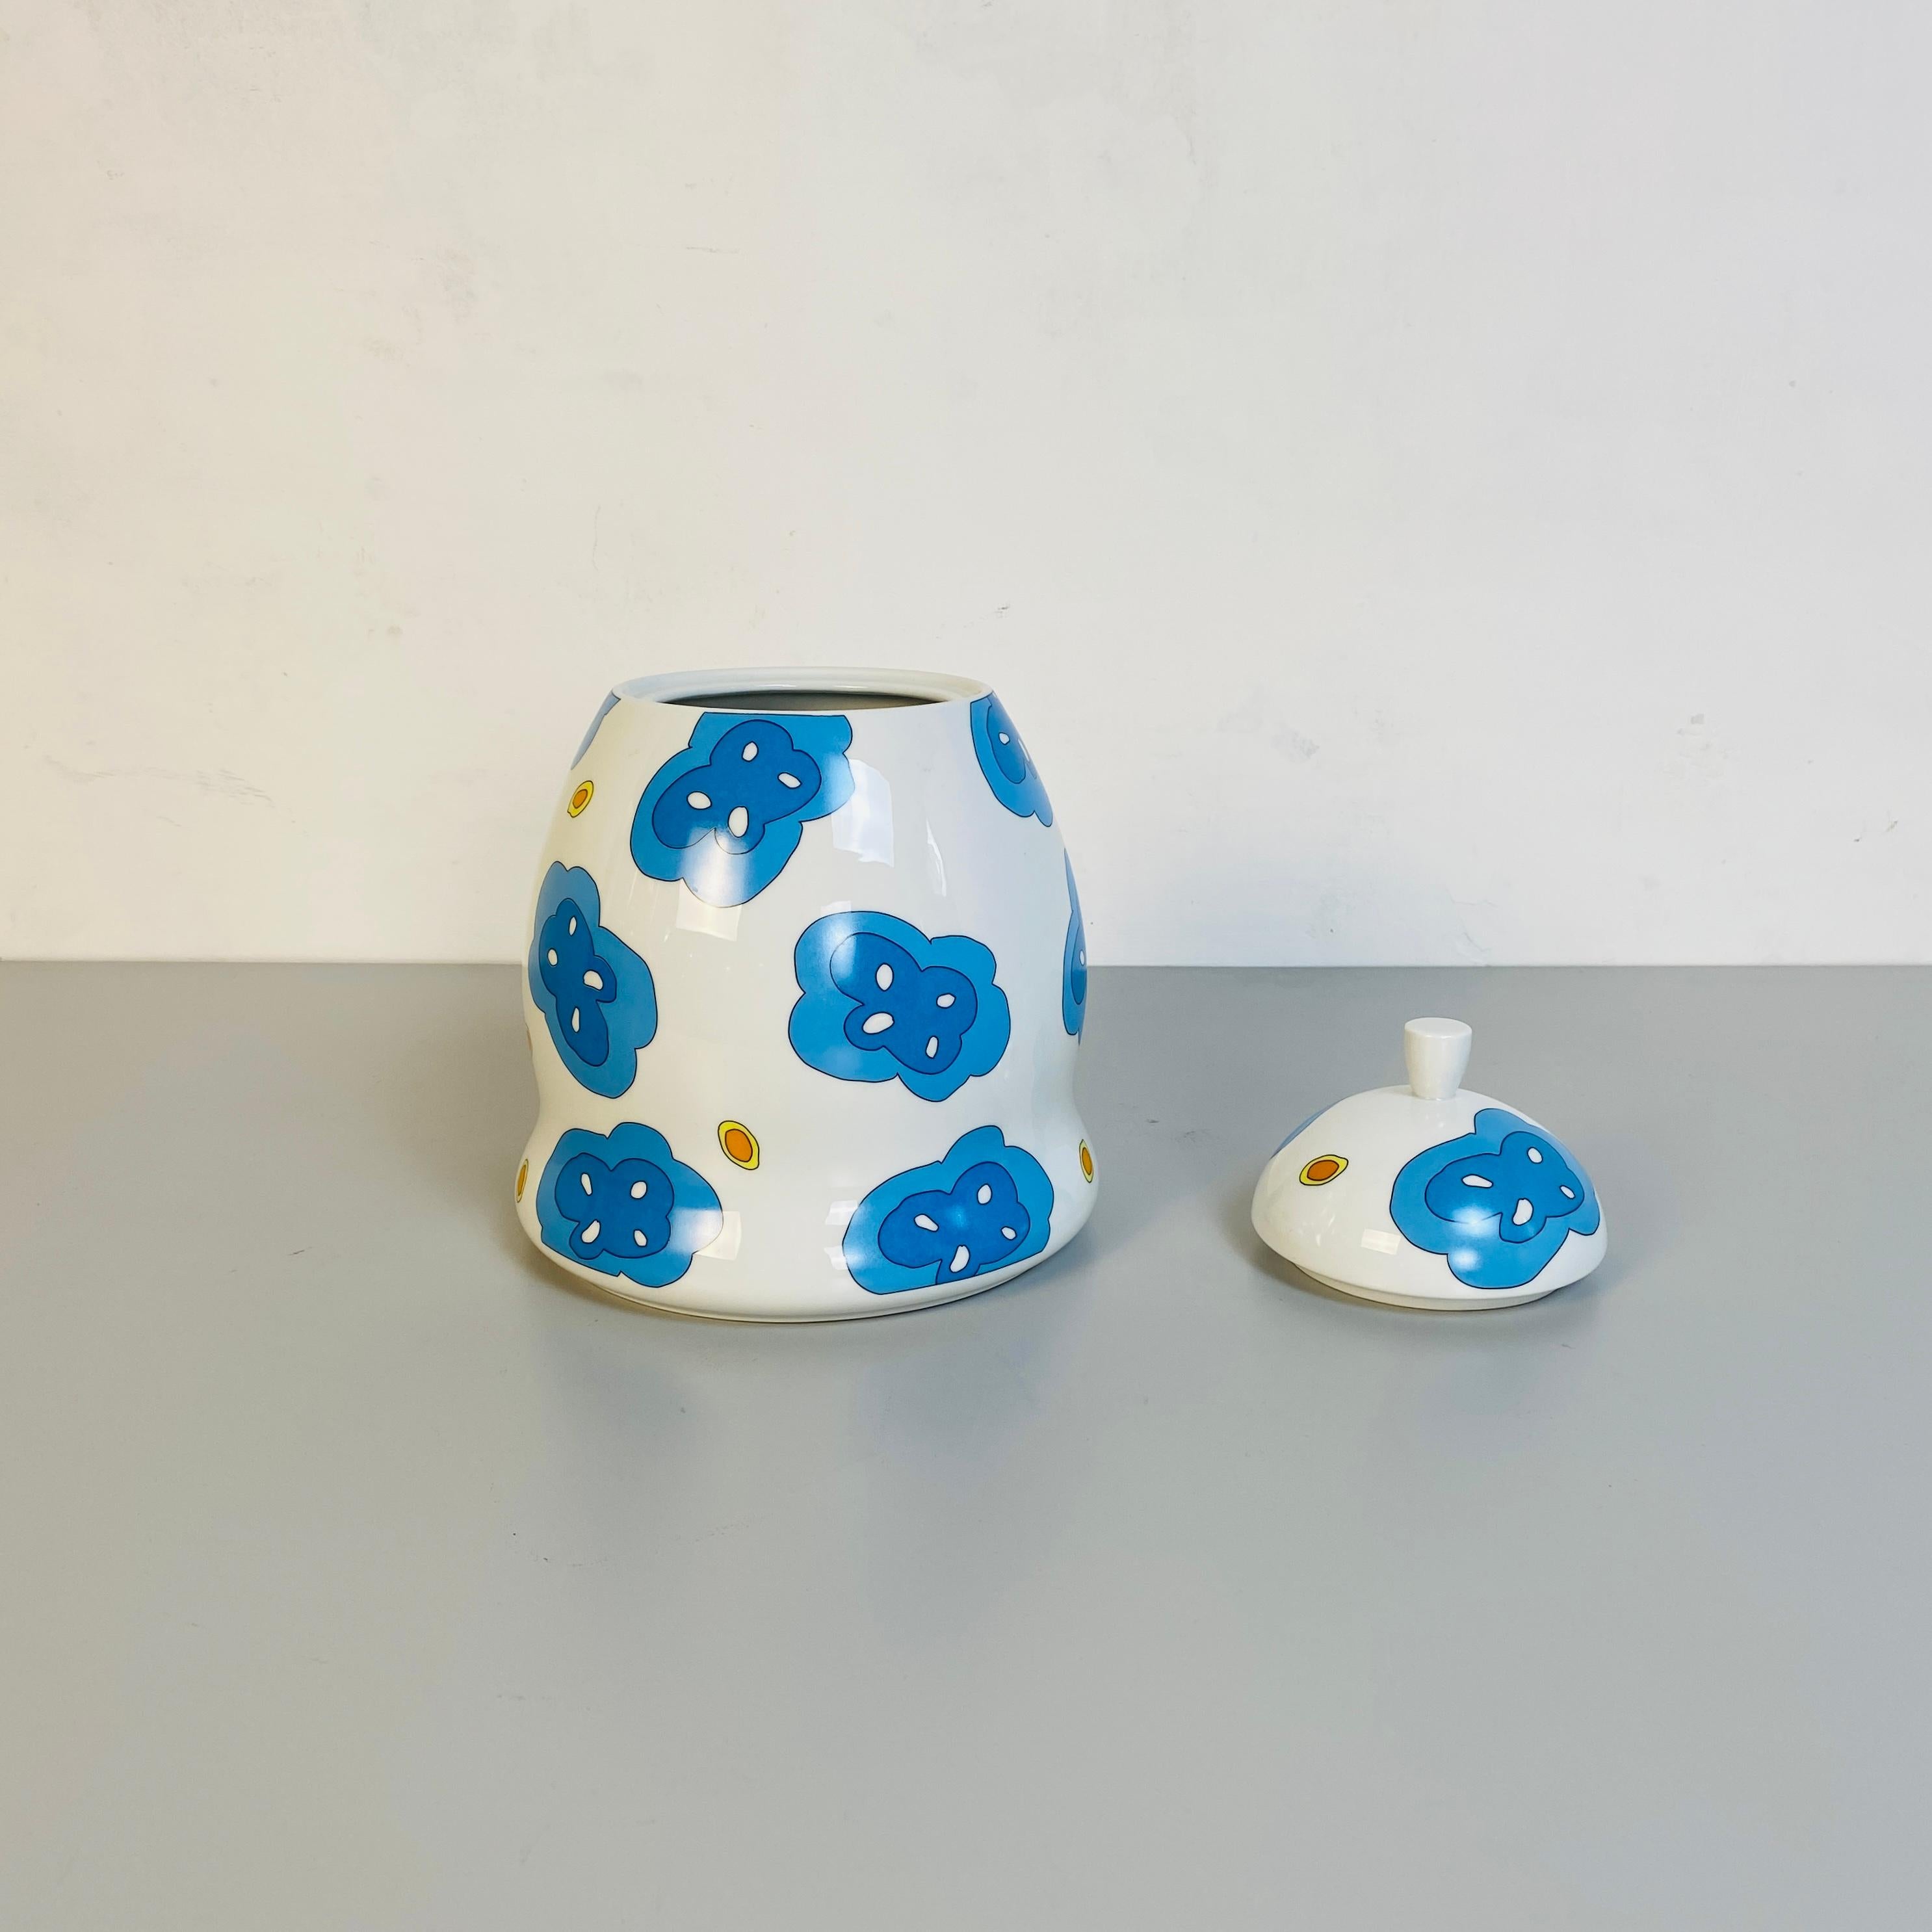 Late 20th Century Italian Jaia Biscuit jar by George Sowden and Alice Fiorilli for Alessi, 1997 For Sale